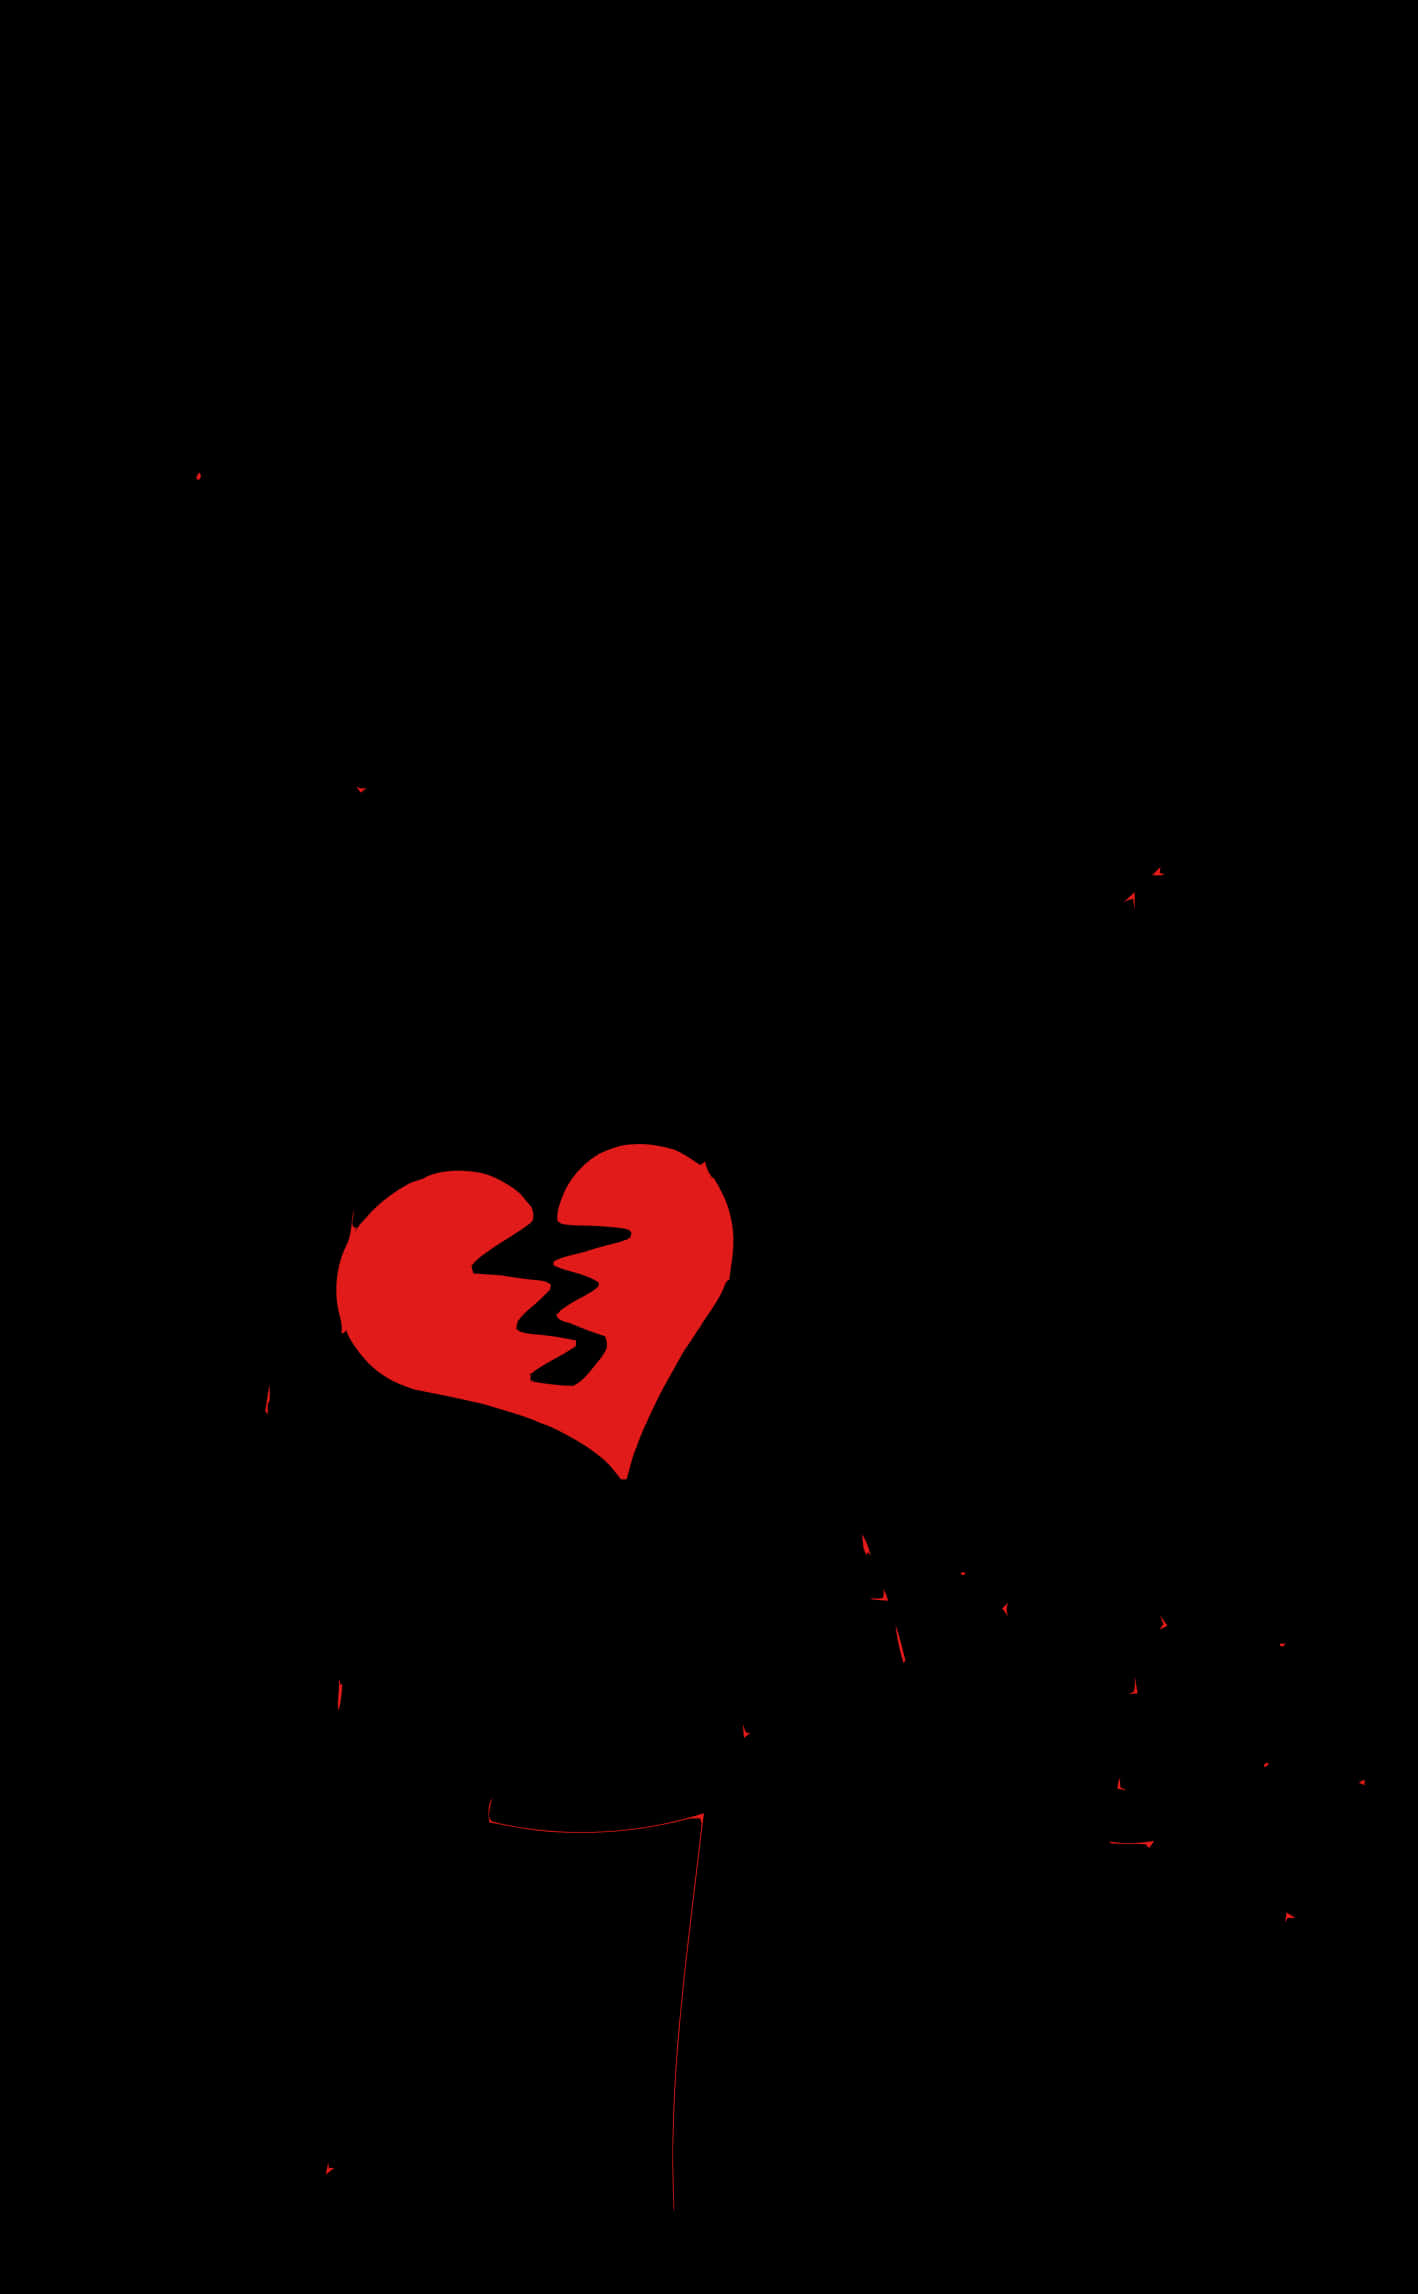 A Red Heart With A Broken Heart PNG